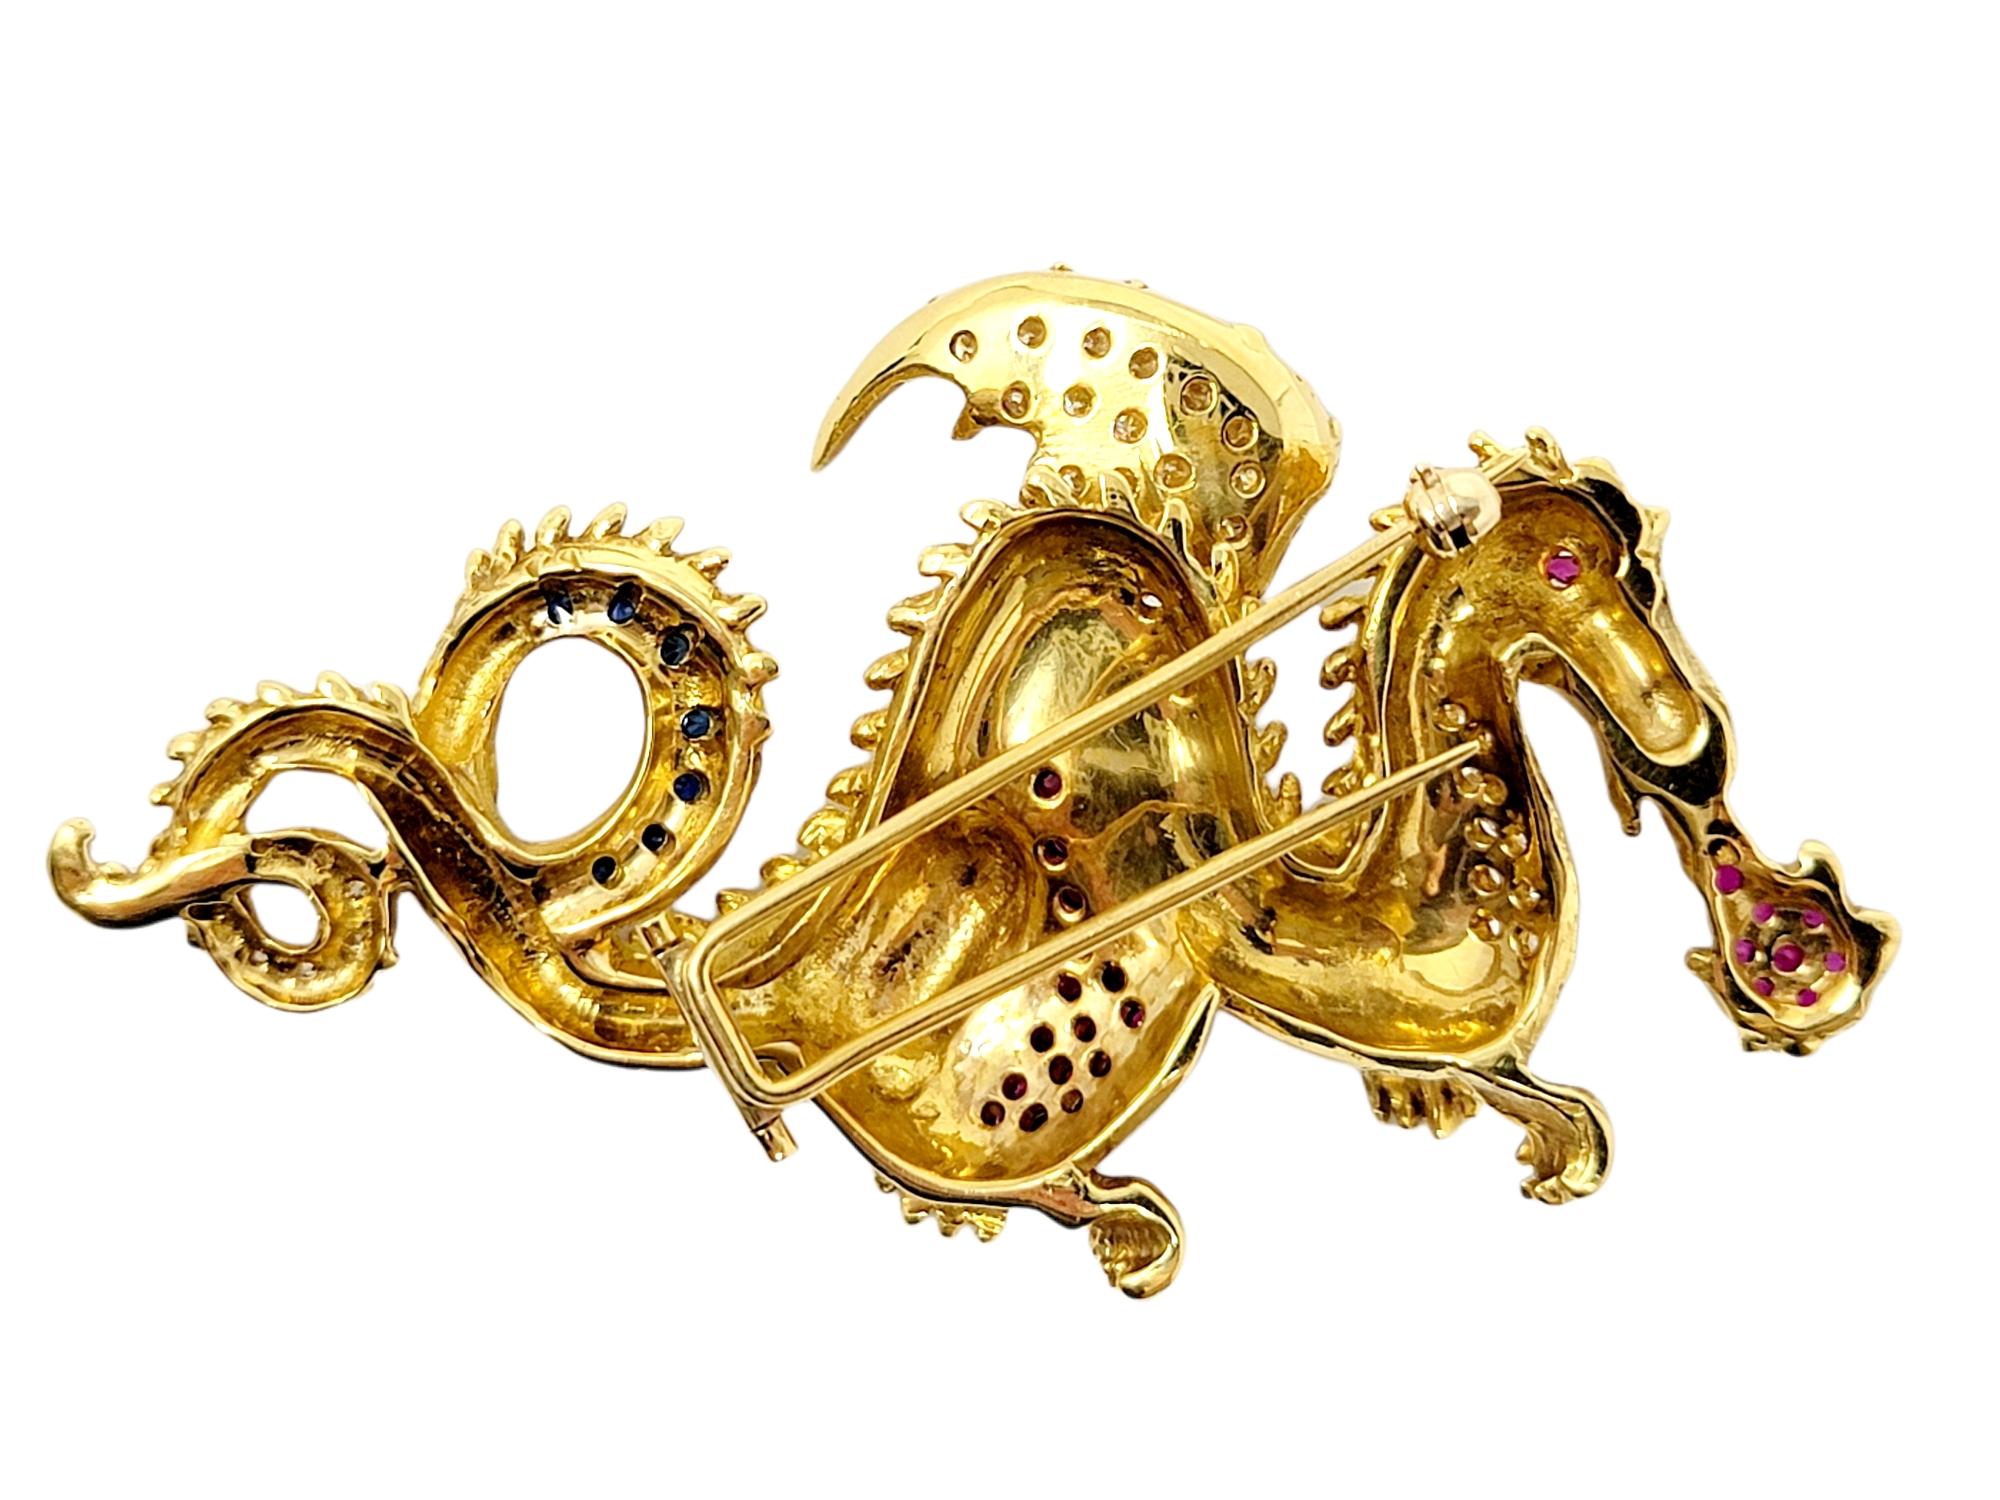 Diamond, Ruby and Sapphire Dragon Brooch 18 Karat Yellow Gold .93 Carats Total  For Sale 1